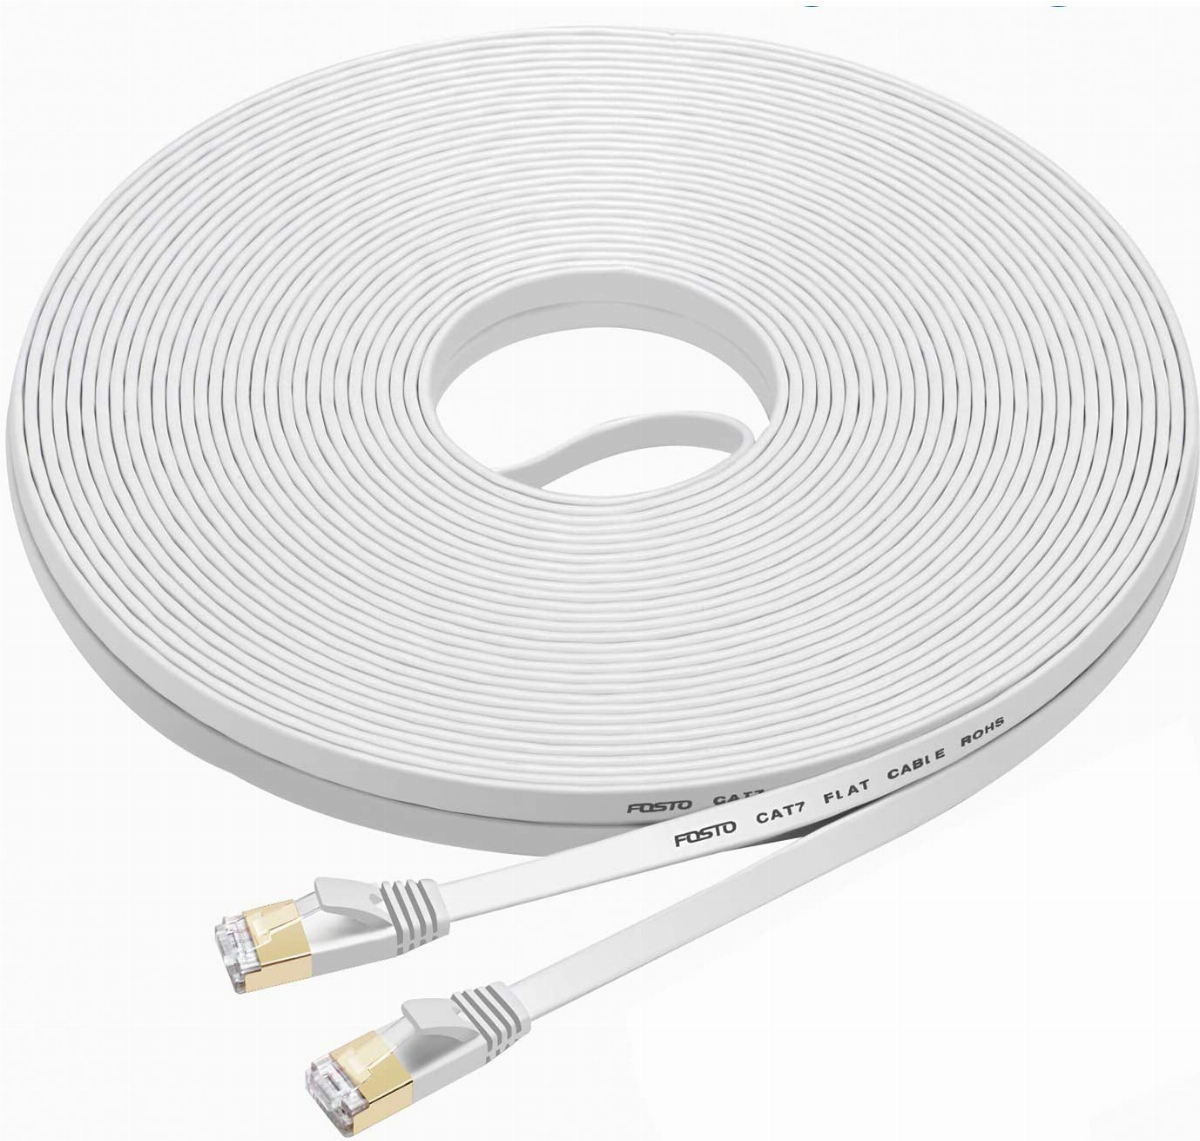 White Xbox Cat 7 Ethernet Cable 100 ft High Speed Modem GLCON Long Ethernet Cable 100ft with RJ45 Connector Flat Cat7 Internet Network Cord 100 Foot Computer LAN Cable for Router Clips 